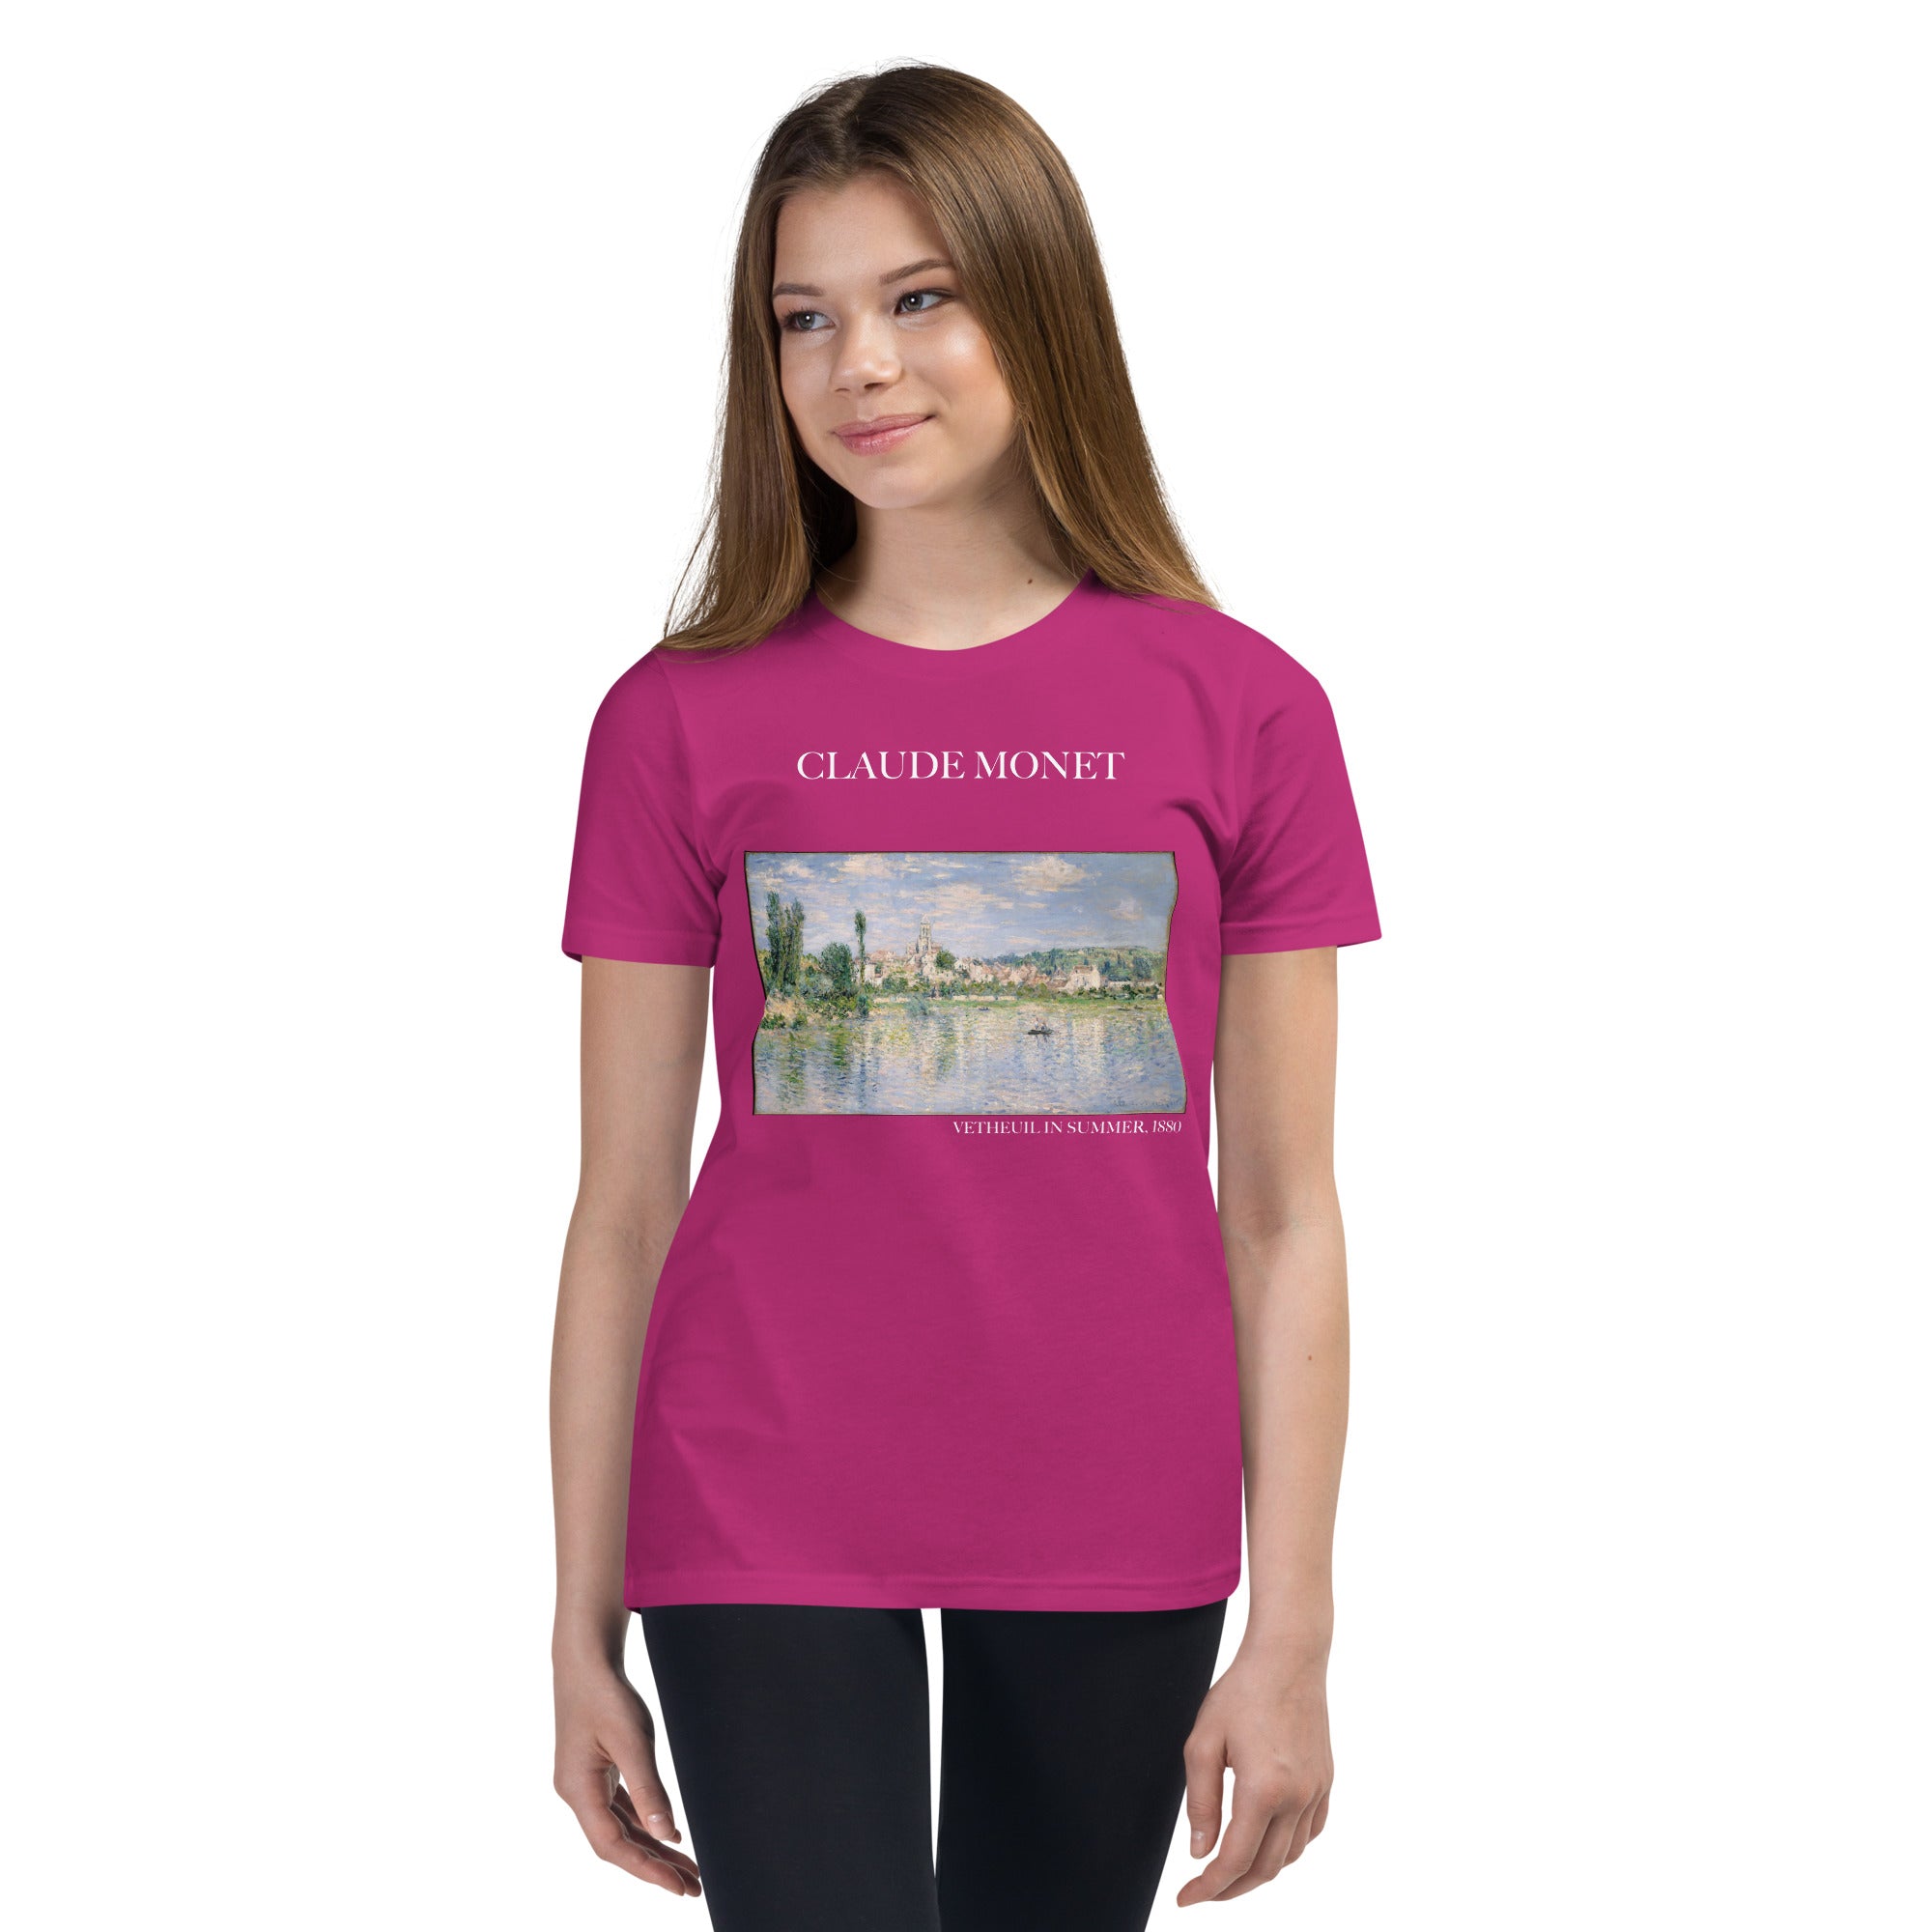 Claude Monet 'Vetheuil in Summer' Famous Painting Short Sleeve T-Shirt | Premium Youth Art Tee